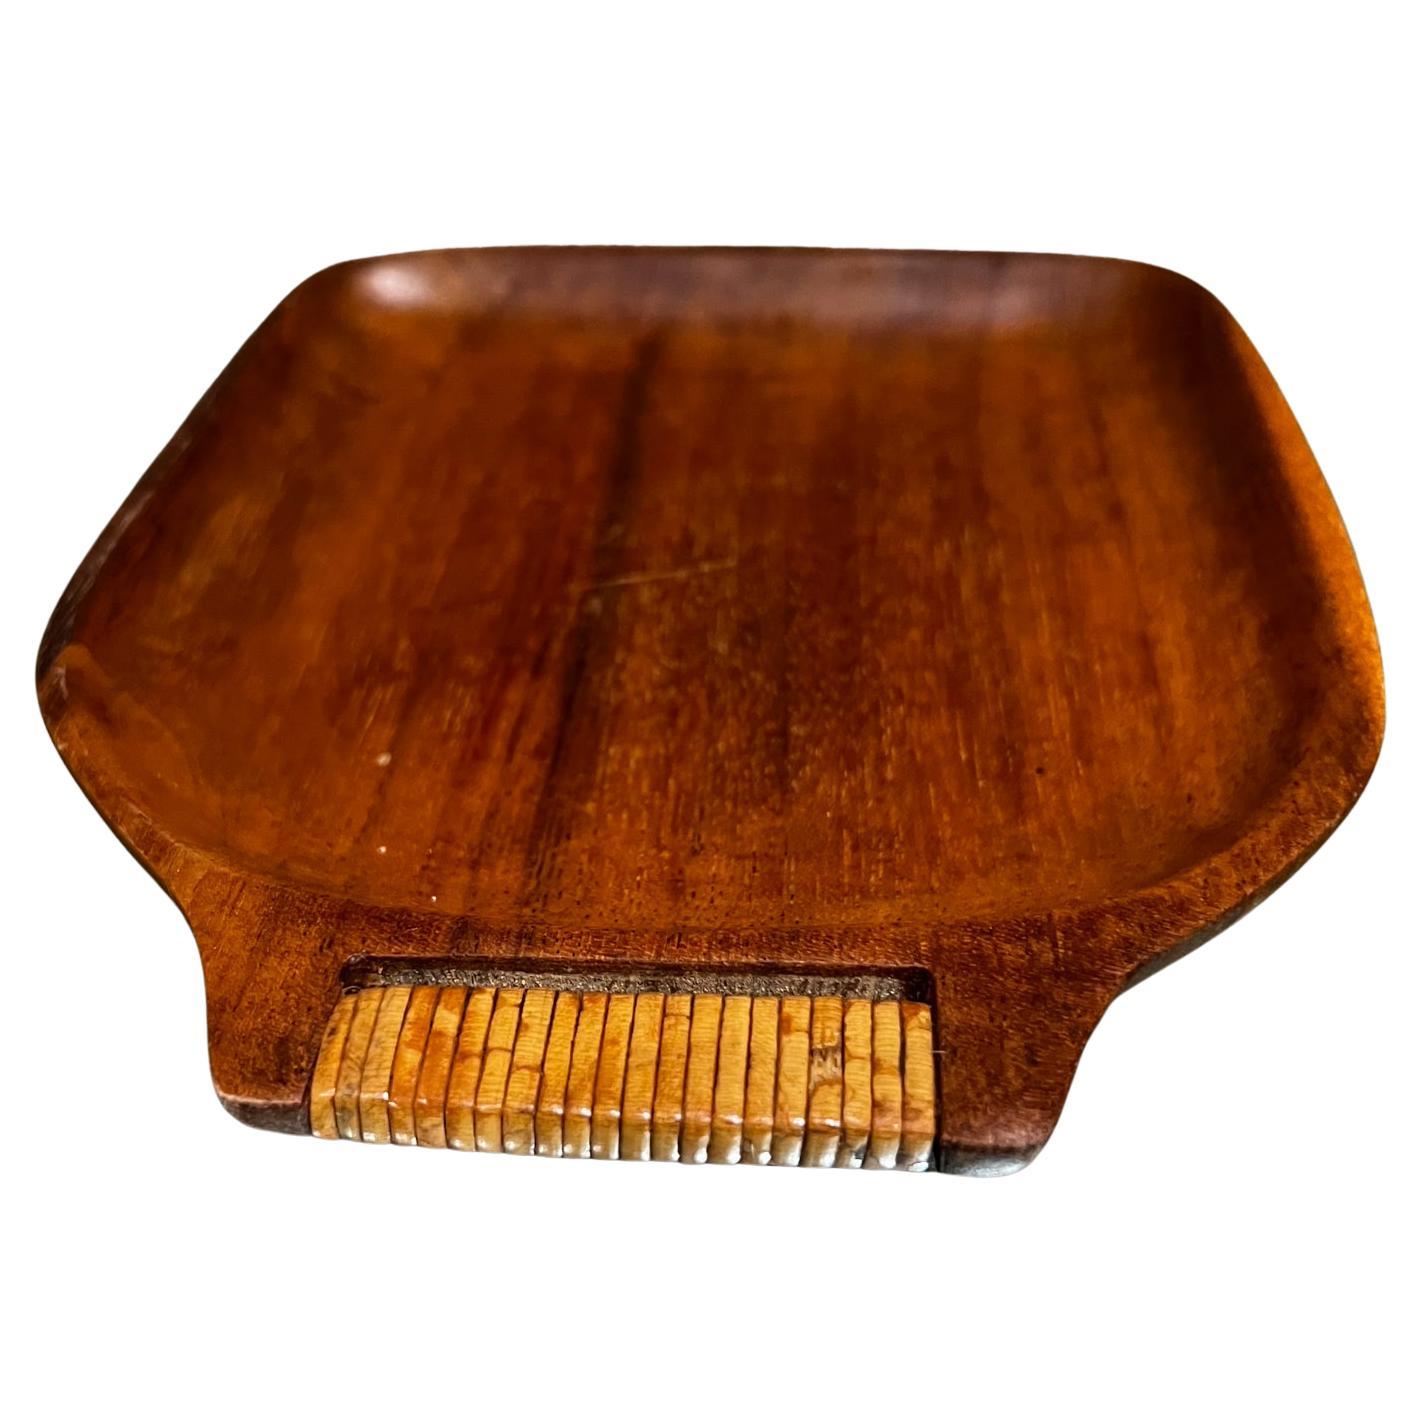 1960s Stylish Modern Teakwood Serving Tray with Cane Wrapped Handle